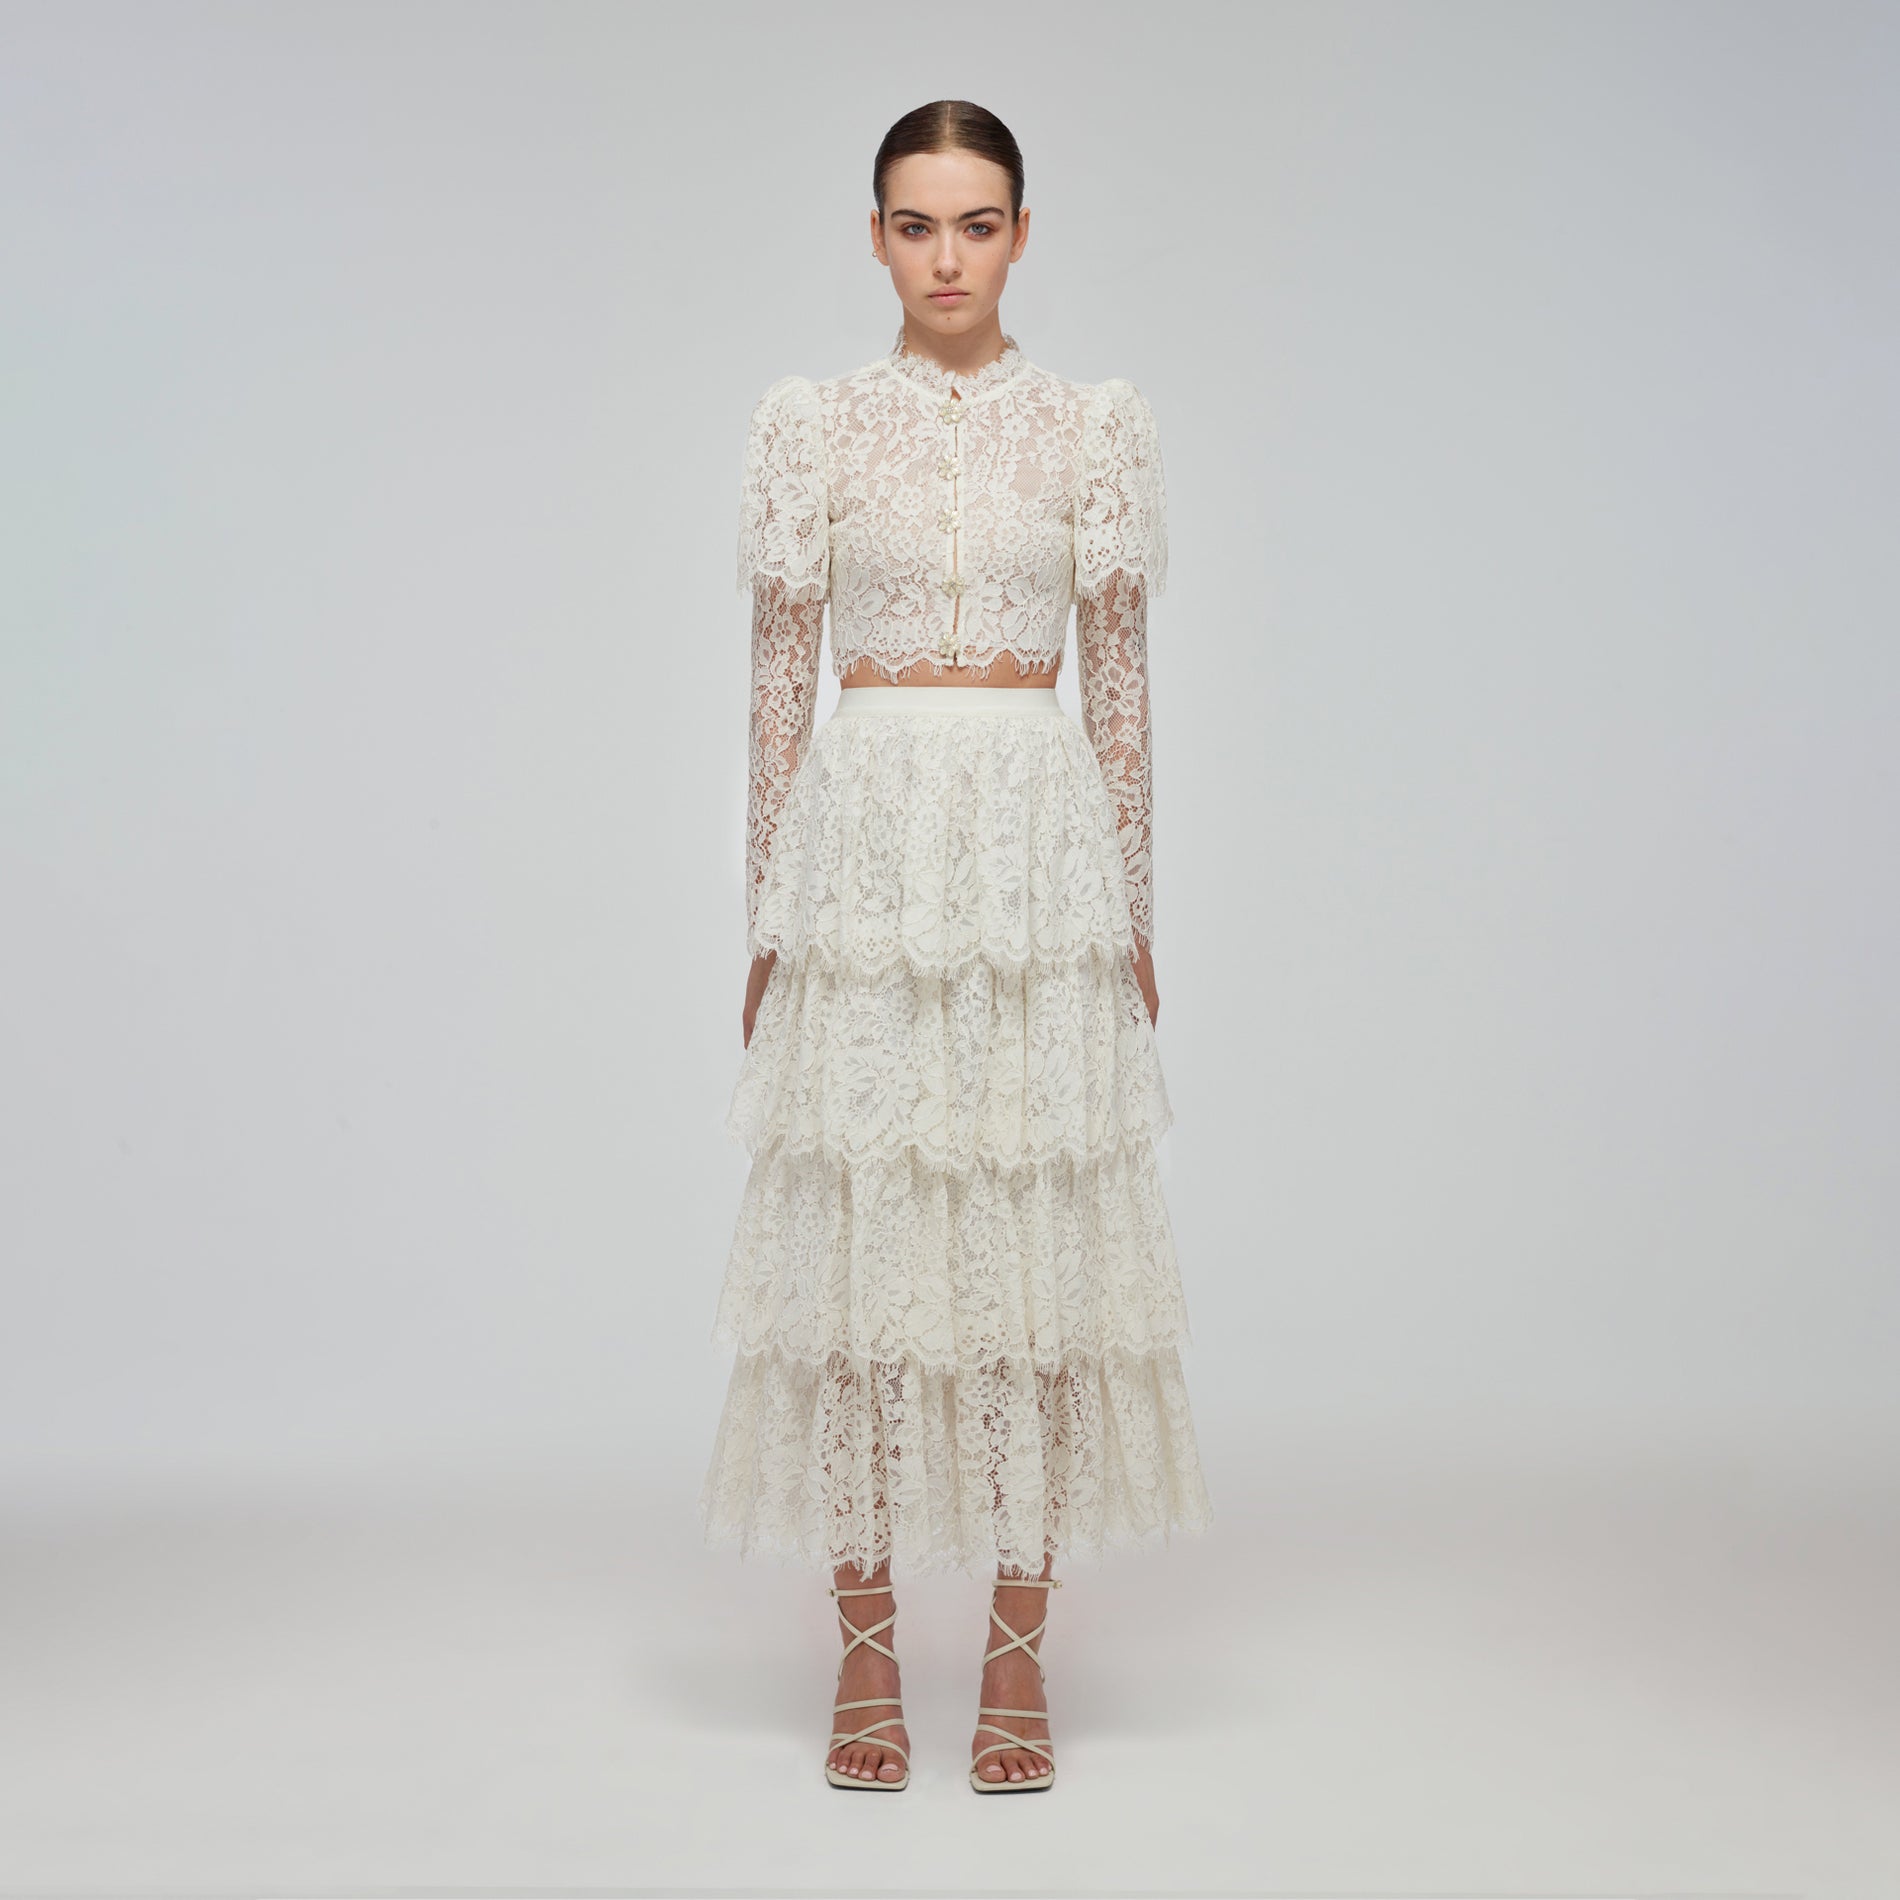 A woman wearing the Ivory Corded Lace Tiered Midi Skirt